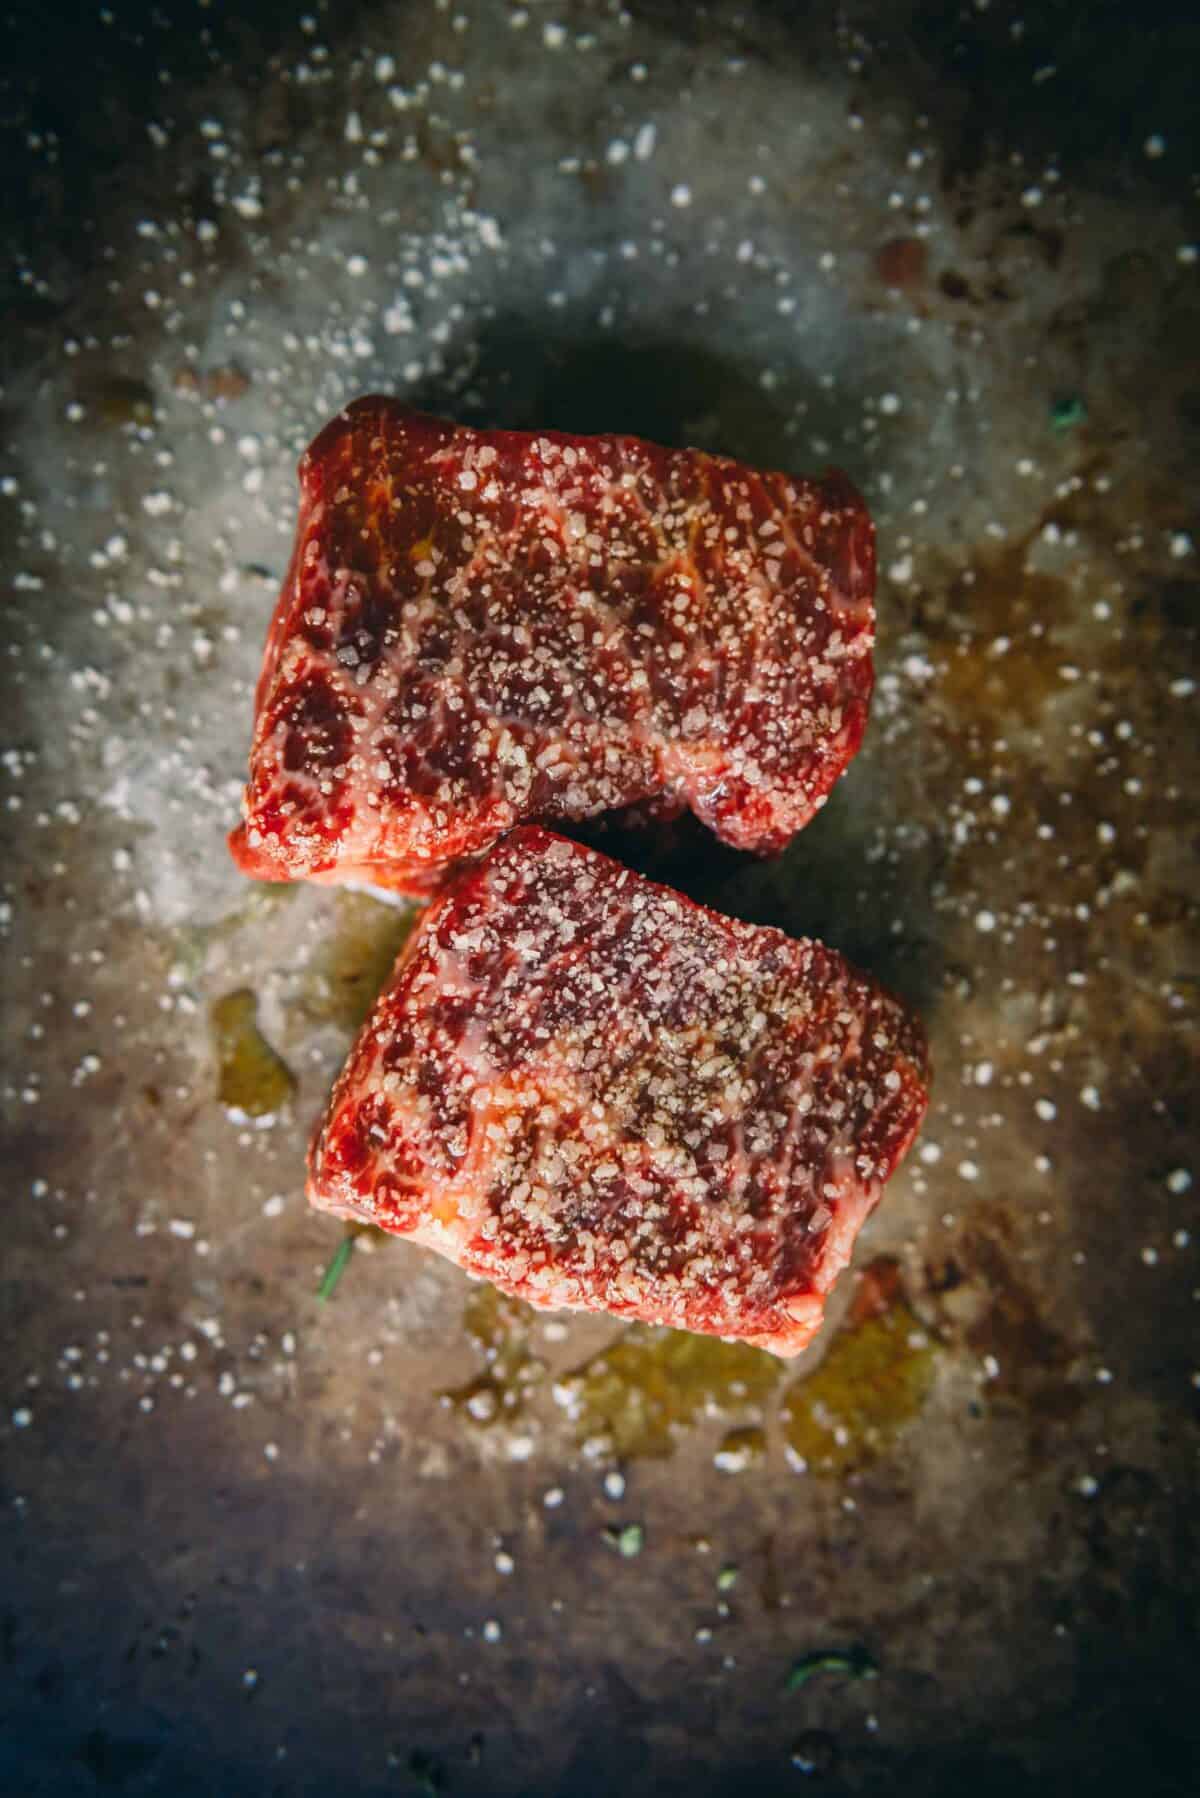 Steaks salted and rubbed with oil.